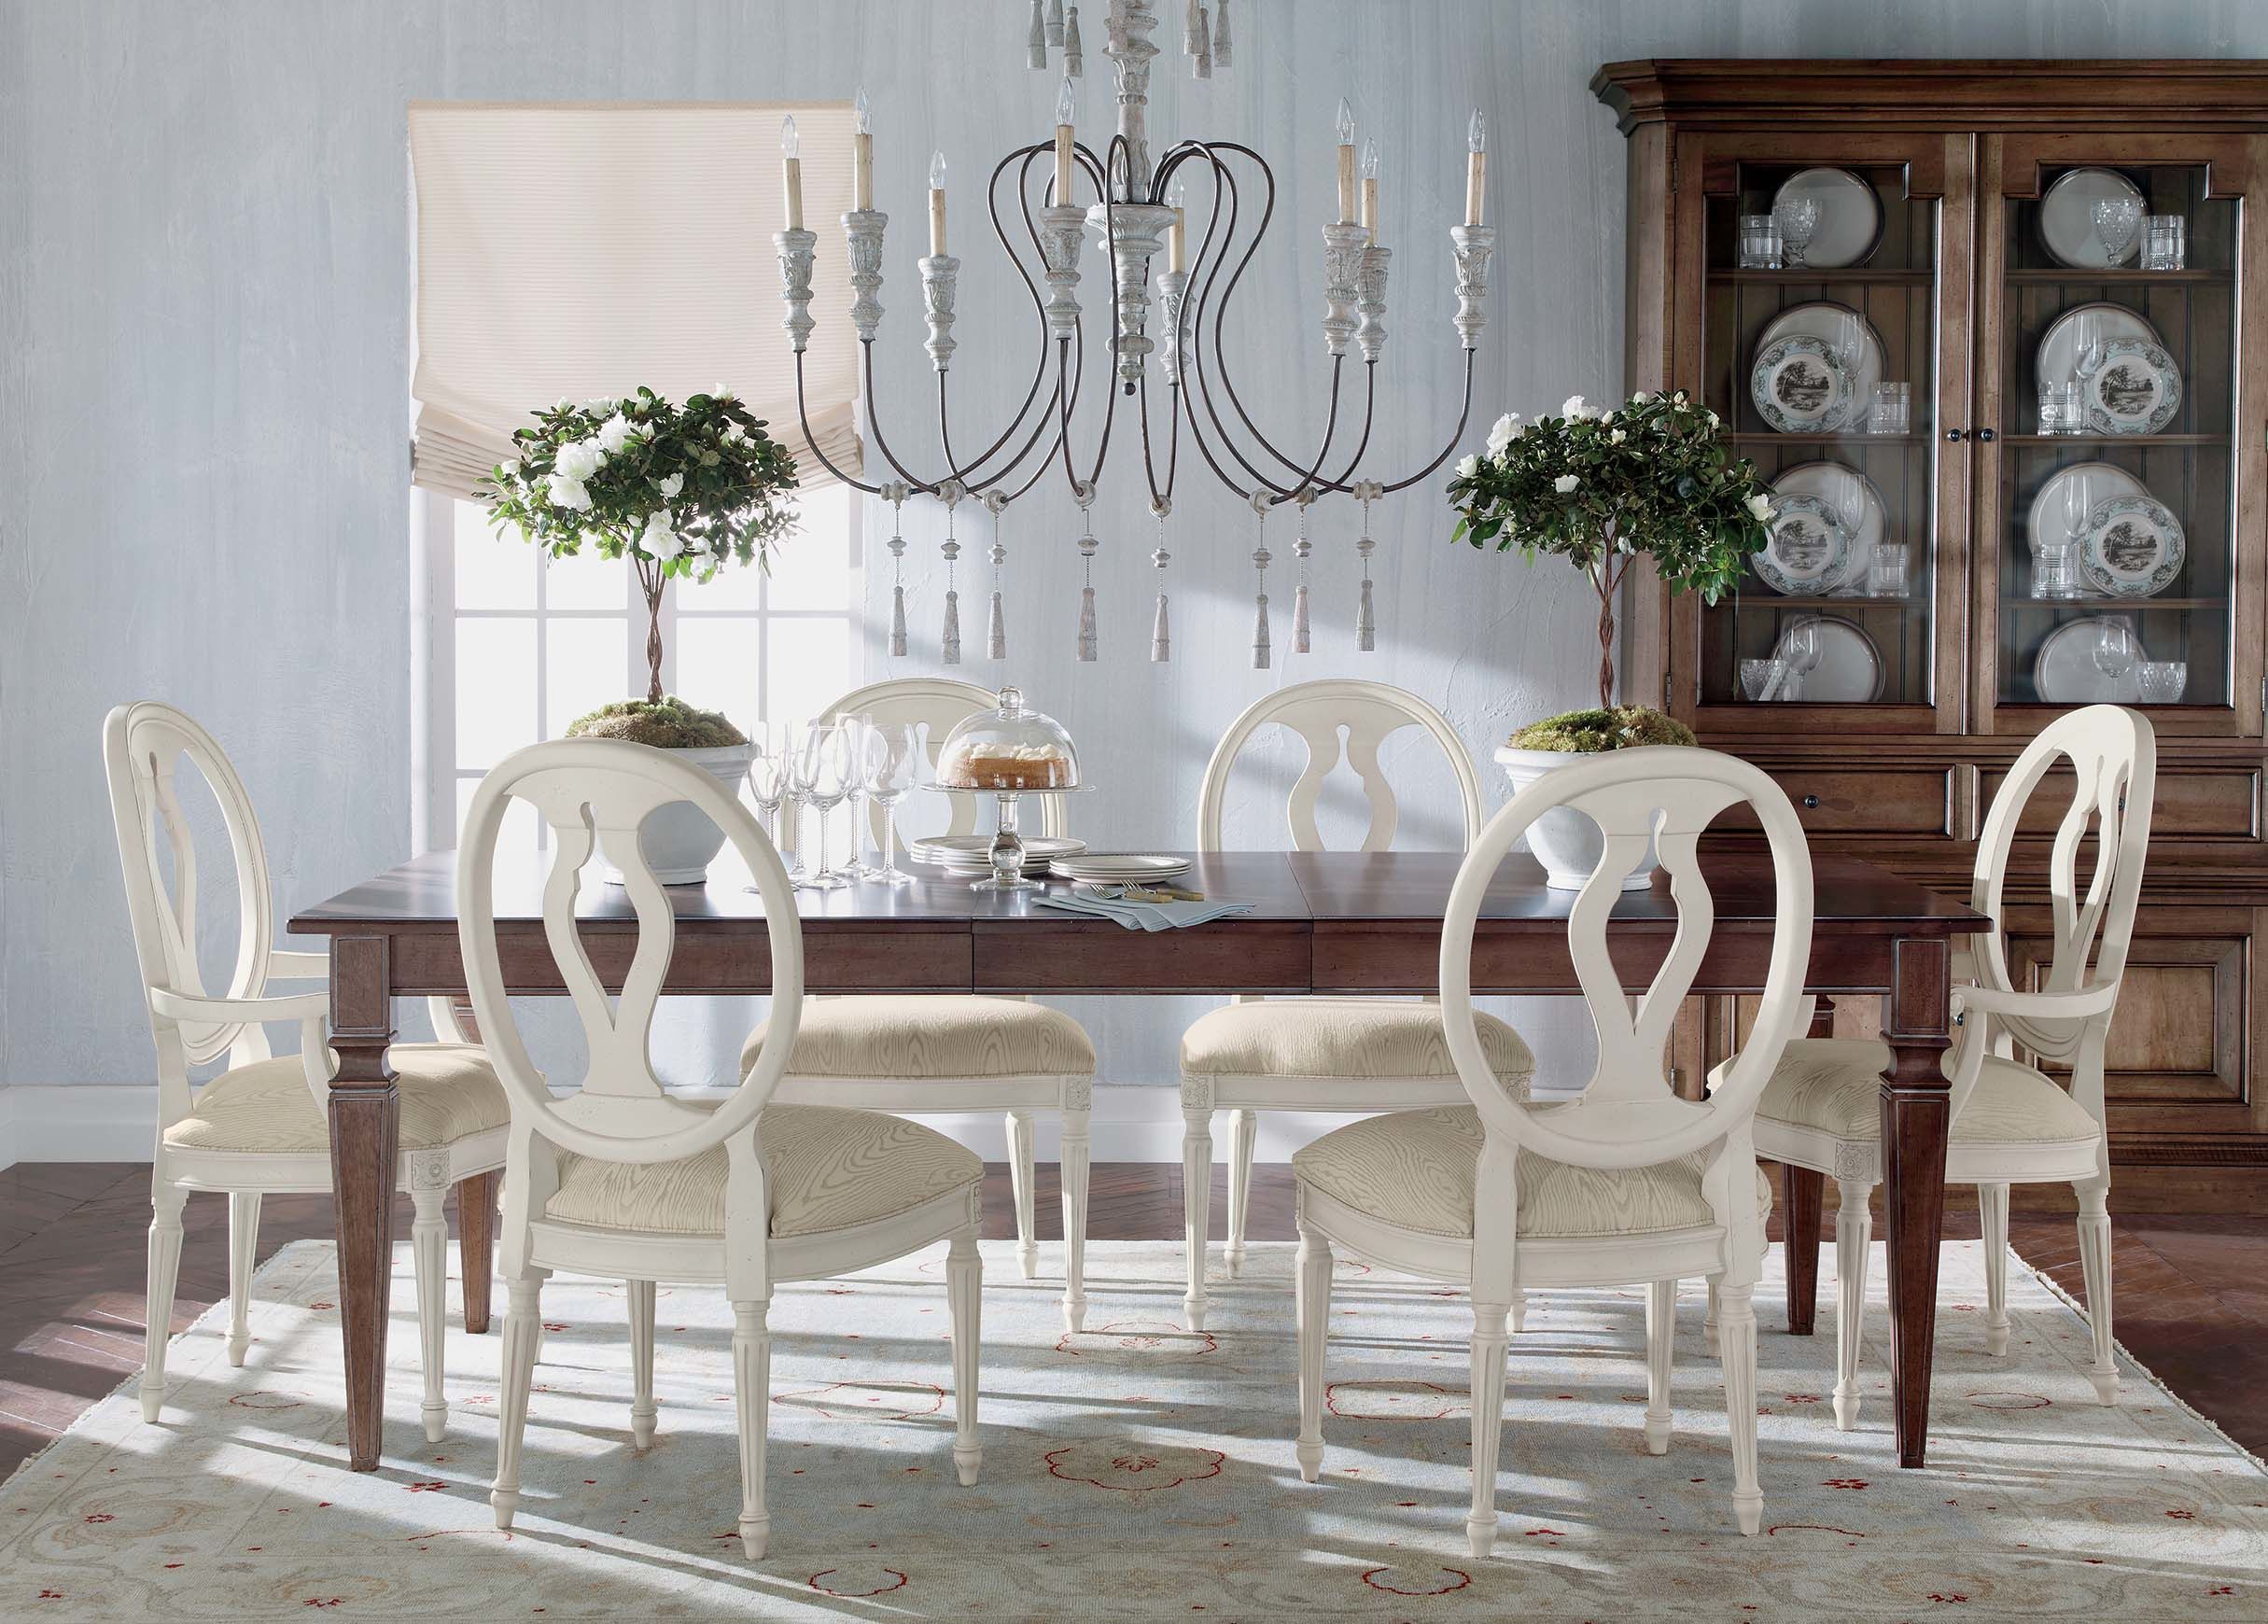 Avery Extension Dining Table | Updated Colonial | Dining Throughout 2017 Avery Round Dining Tables (View 10 of 25)